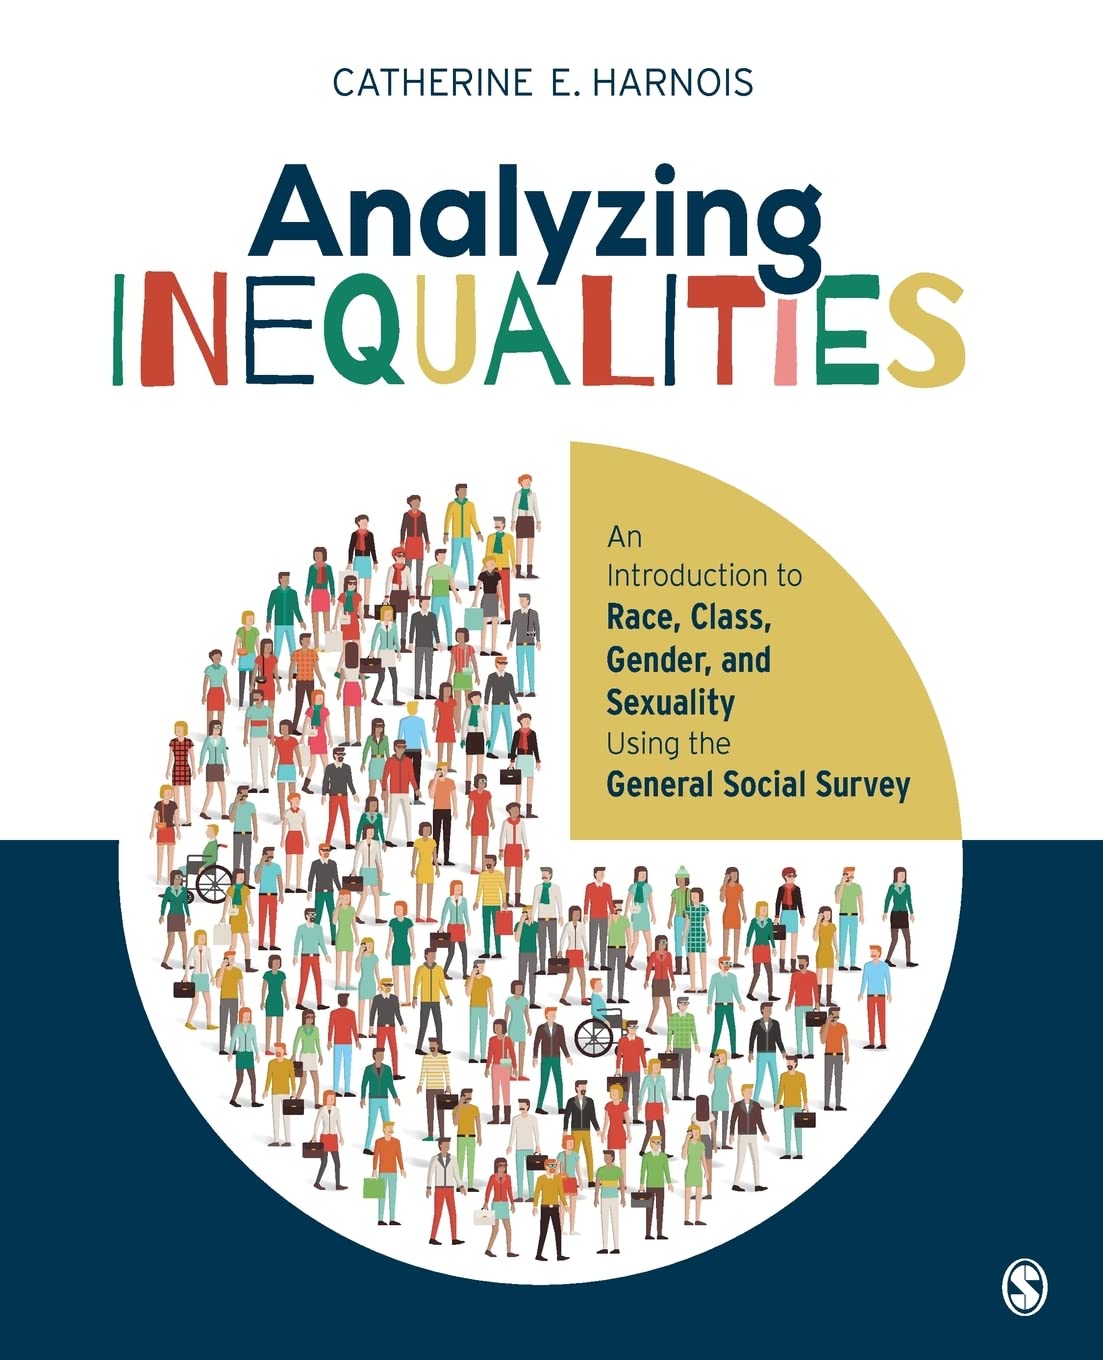 test bank questions and practice tests for Analyzing Inequalities, by Harnois